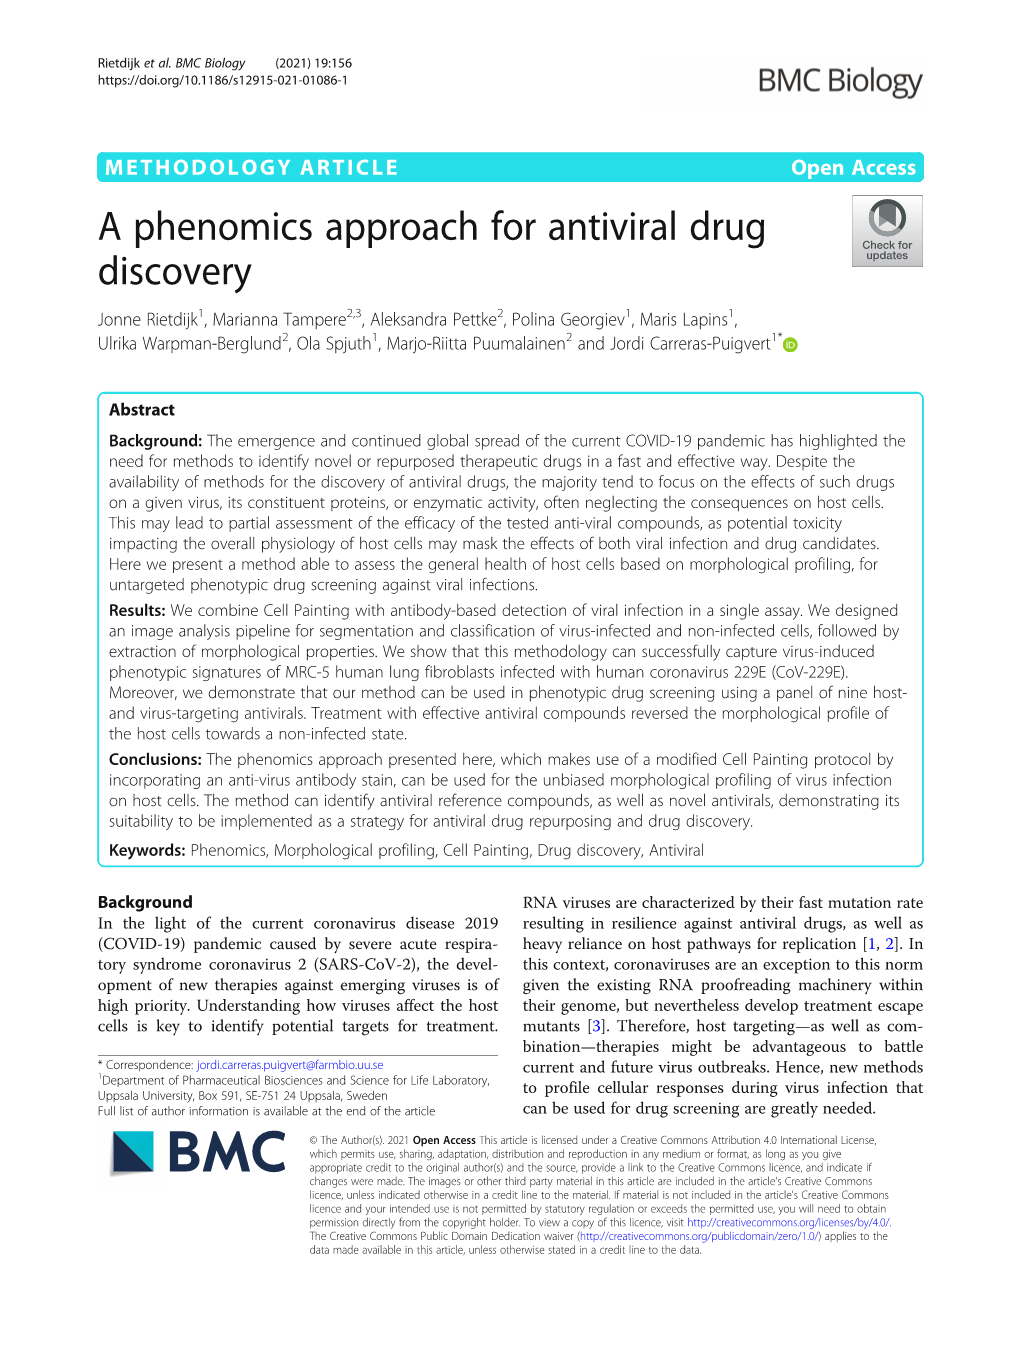 A Phenomics Approach for Antiviral Drug Discovery